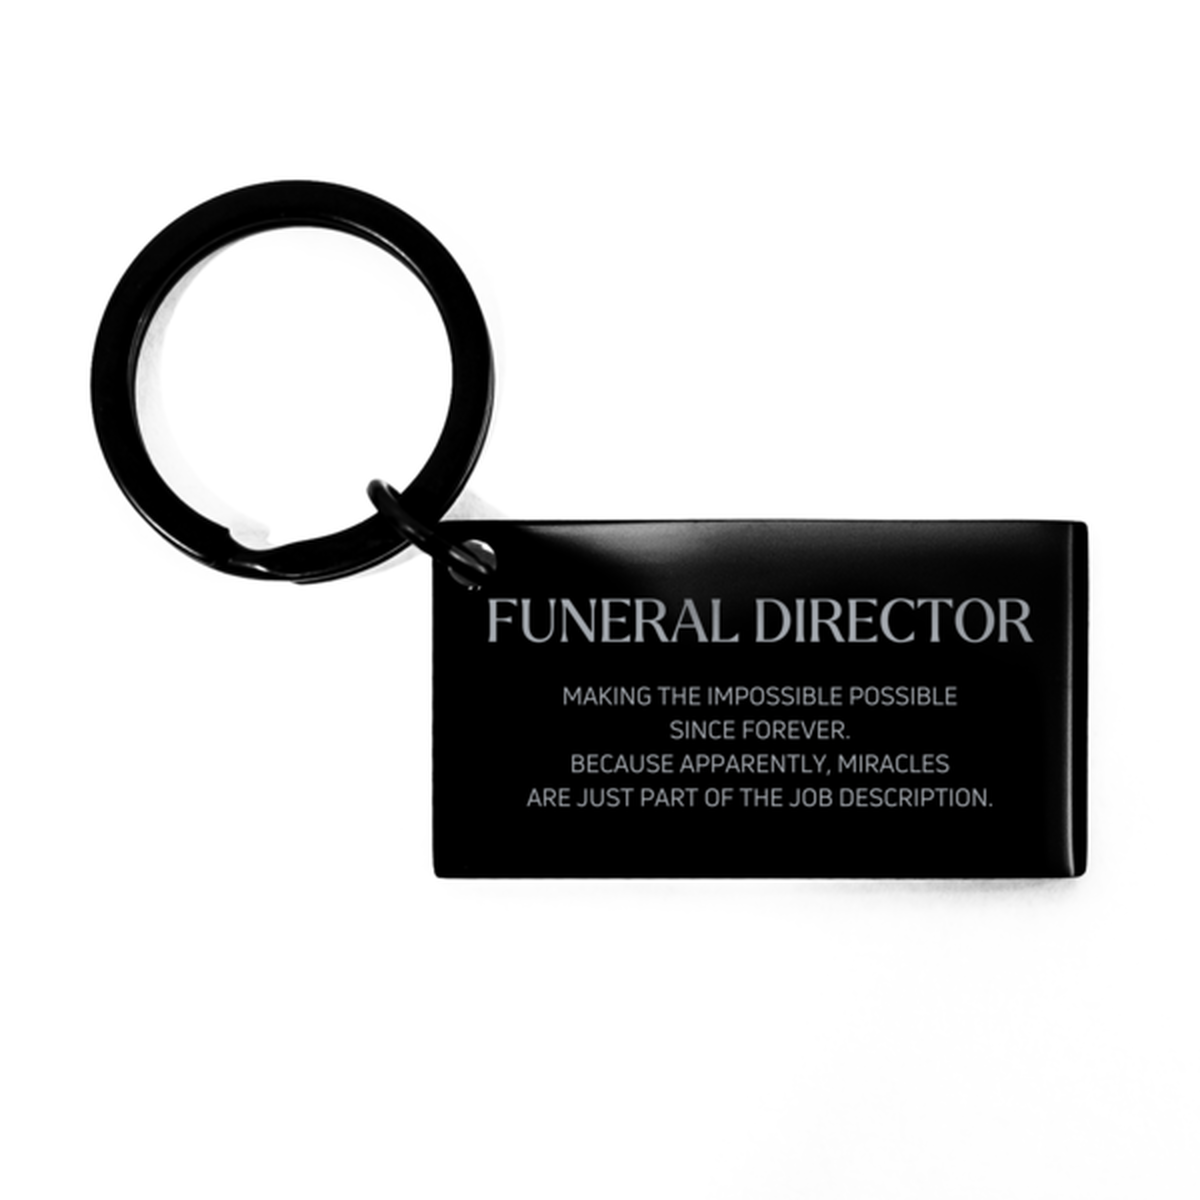 Funny Funeral Director Gifts, Miracles are just part of the job description, Inspirational Birthday Keychain For Funeral Director, Men, Women, Coworkers, Friends, Boss